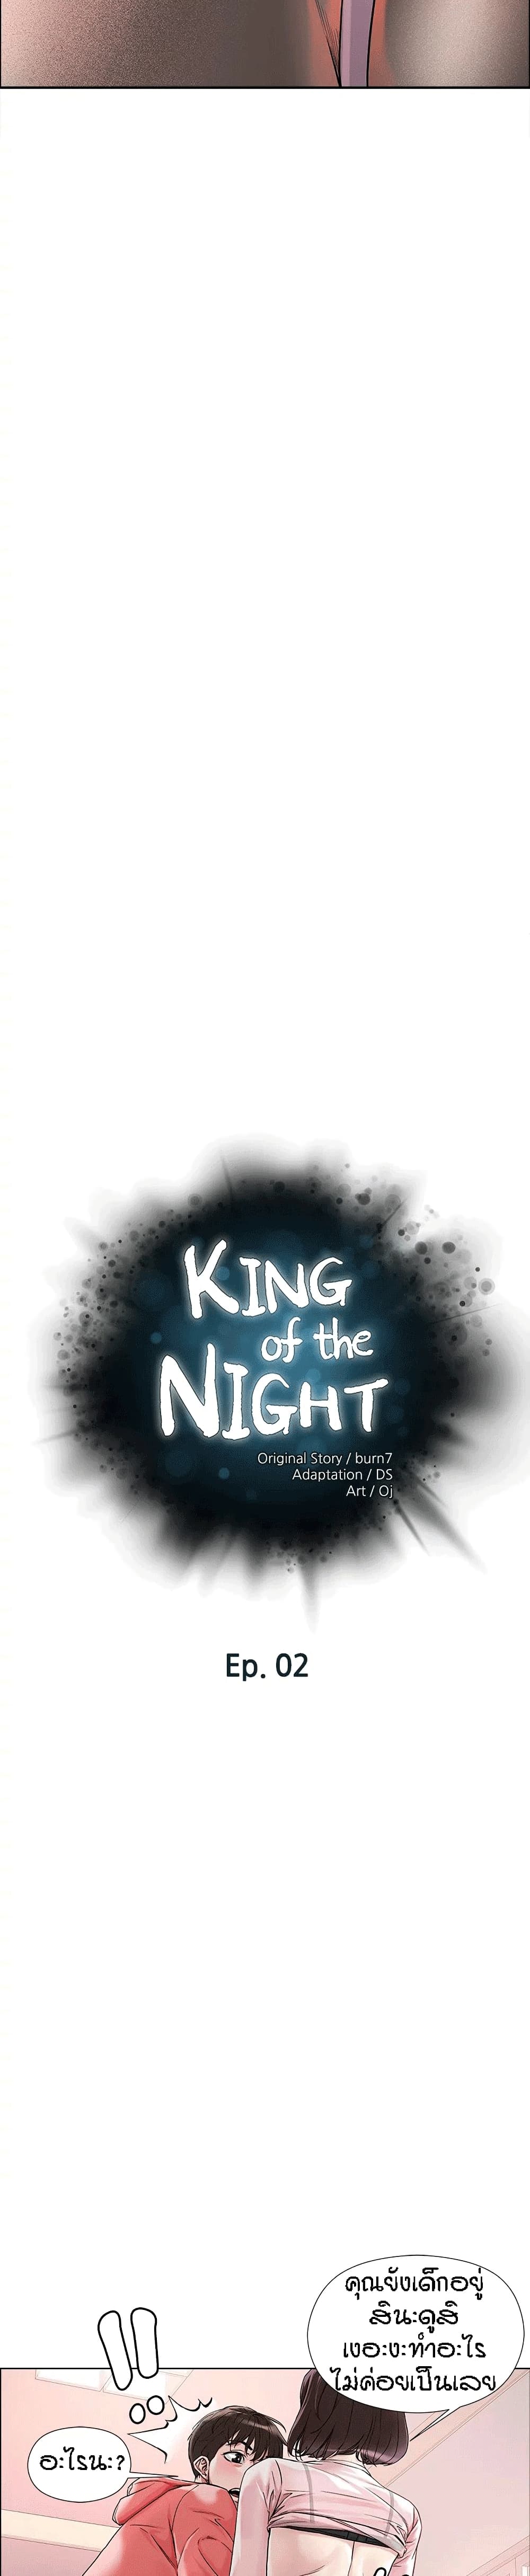 King of the Night 2 (3)